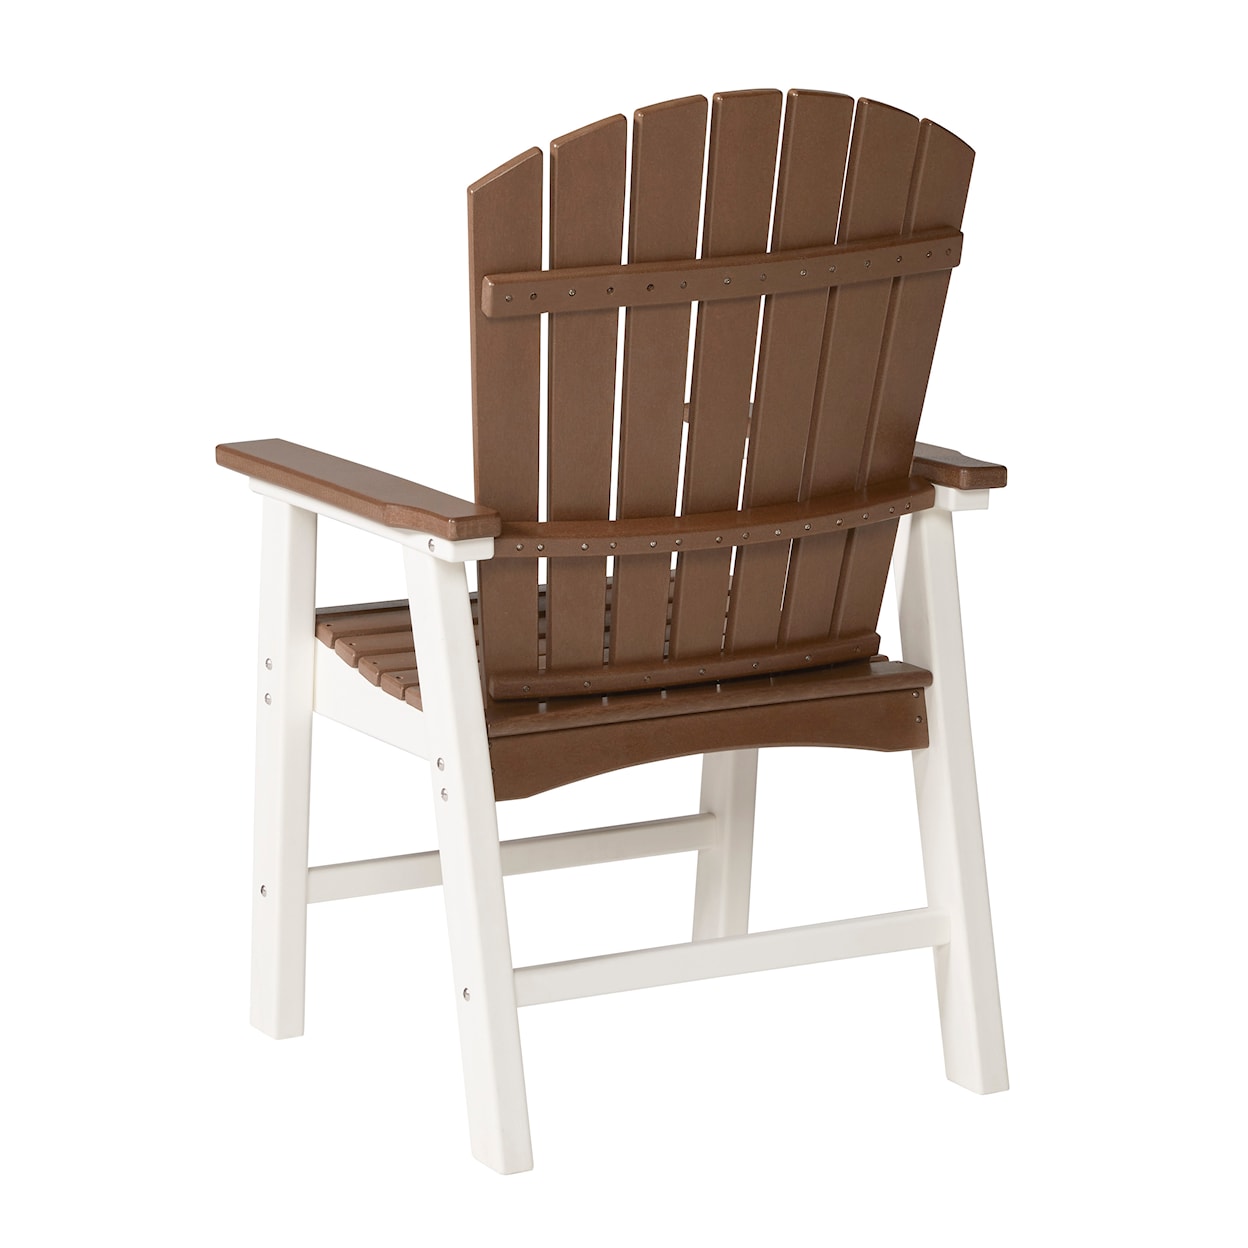 Signature Genesis Bay Outdoor Dining Arm Chair (Set of 2)